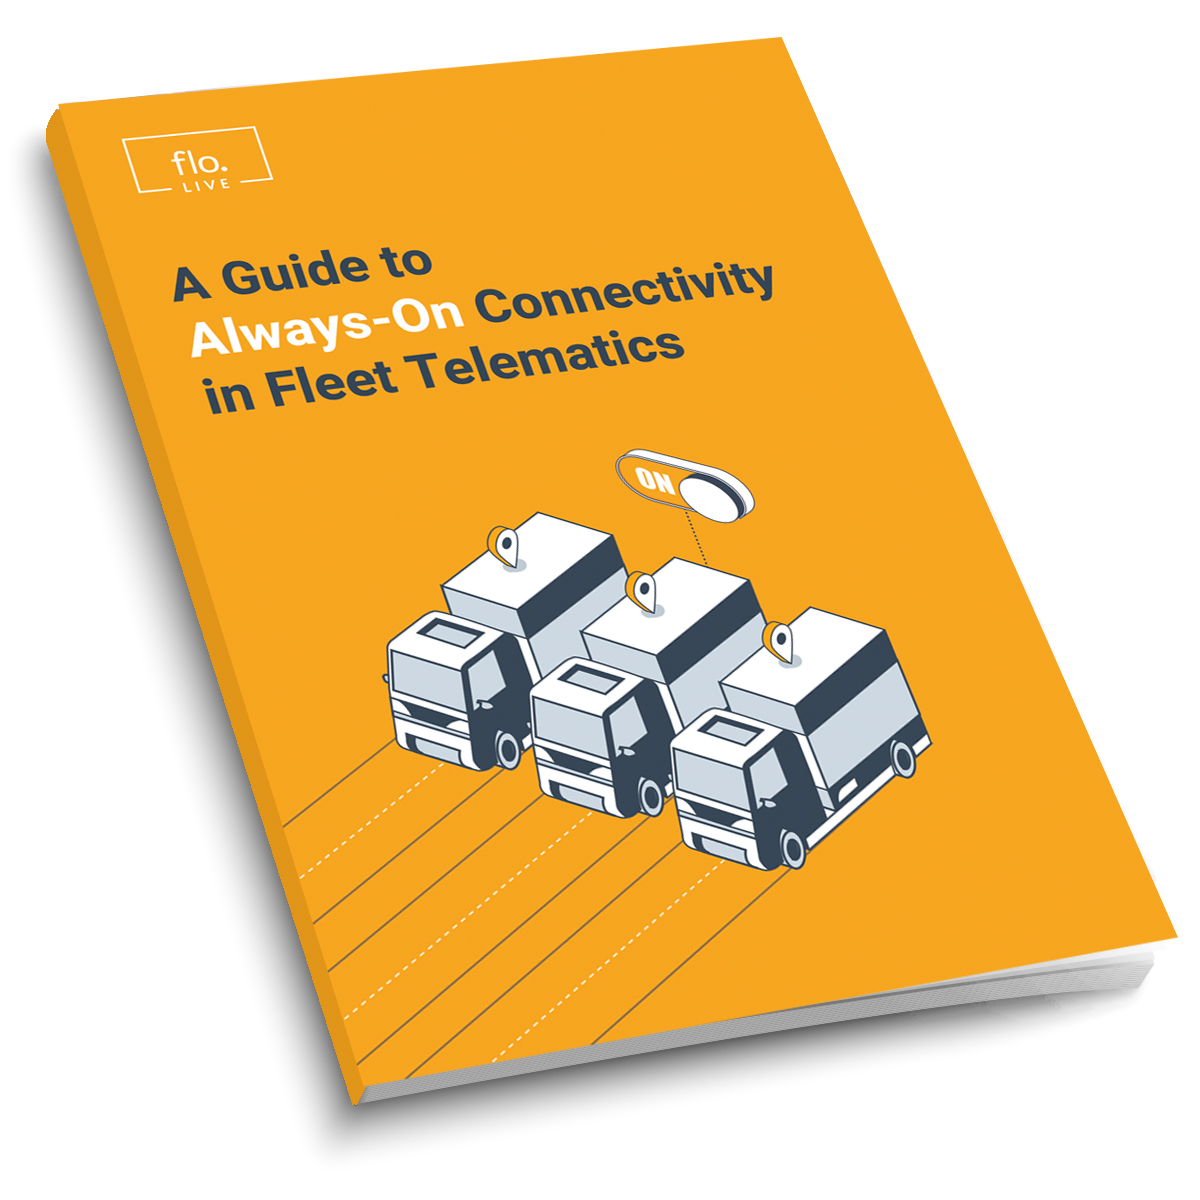 A Guide to Always-On Connectivity in Fleet Telematics image